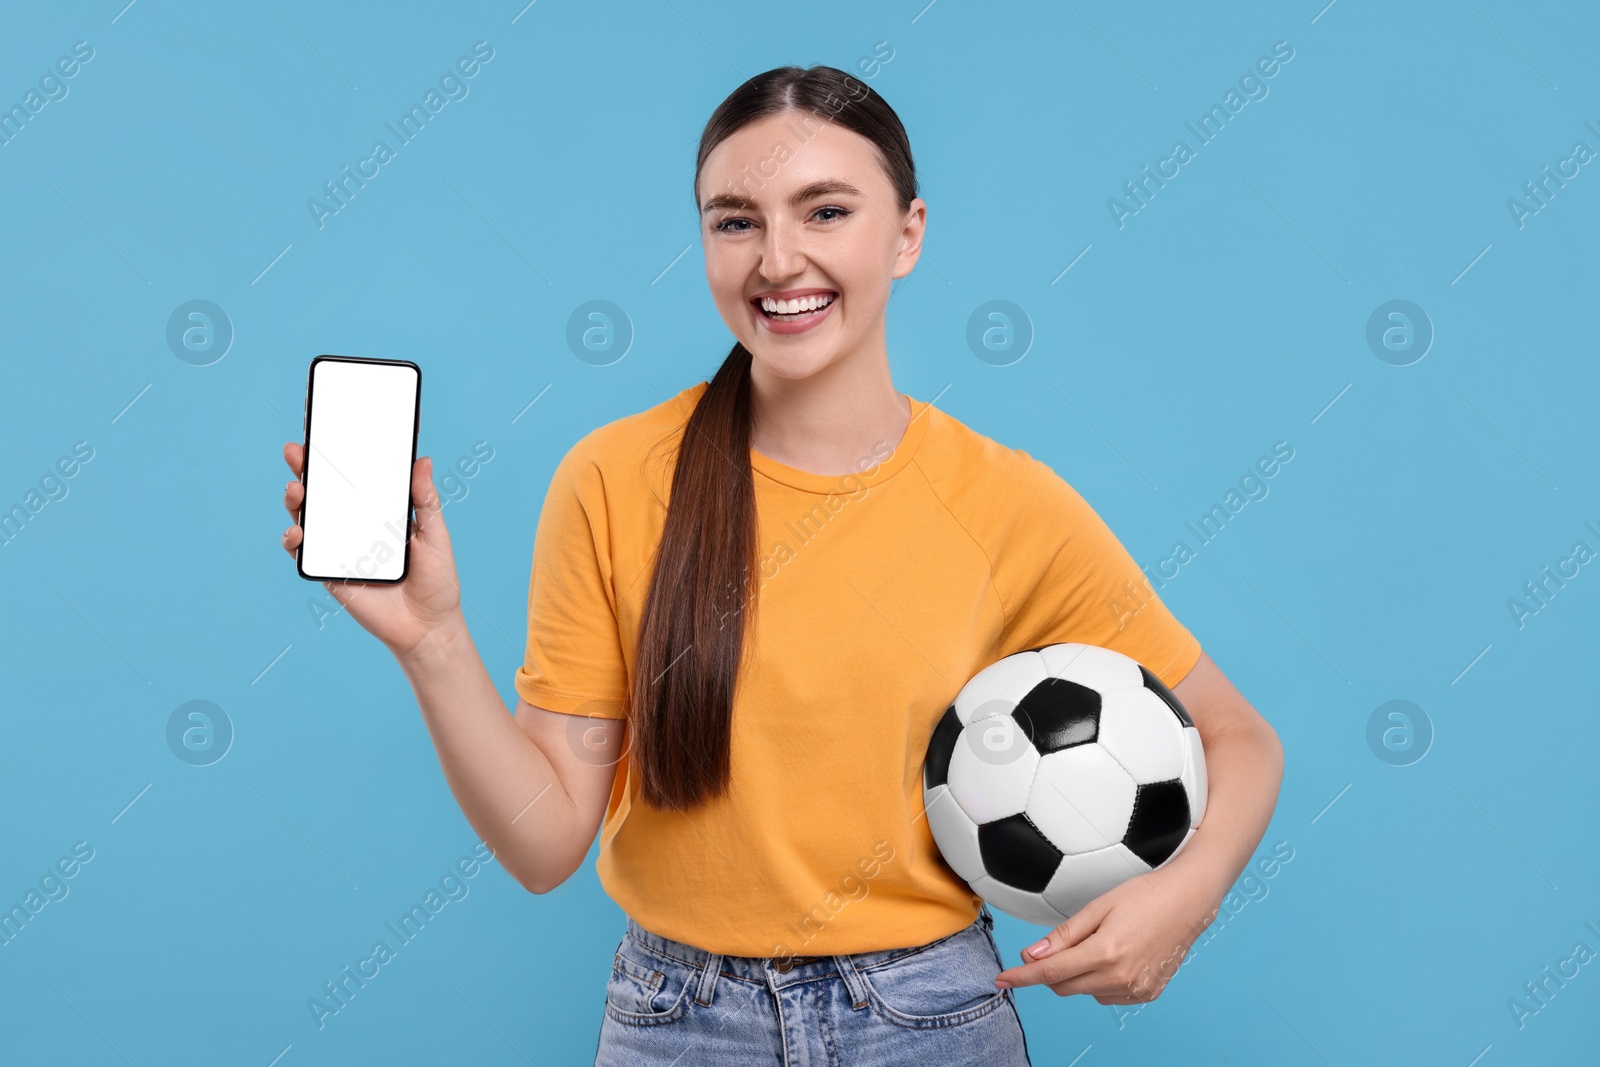 Photo of Happy soccer fan with ball showing smartphone on light blue background